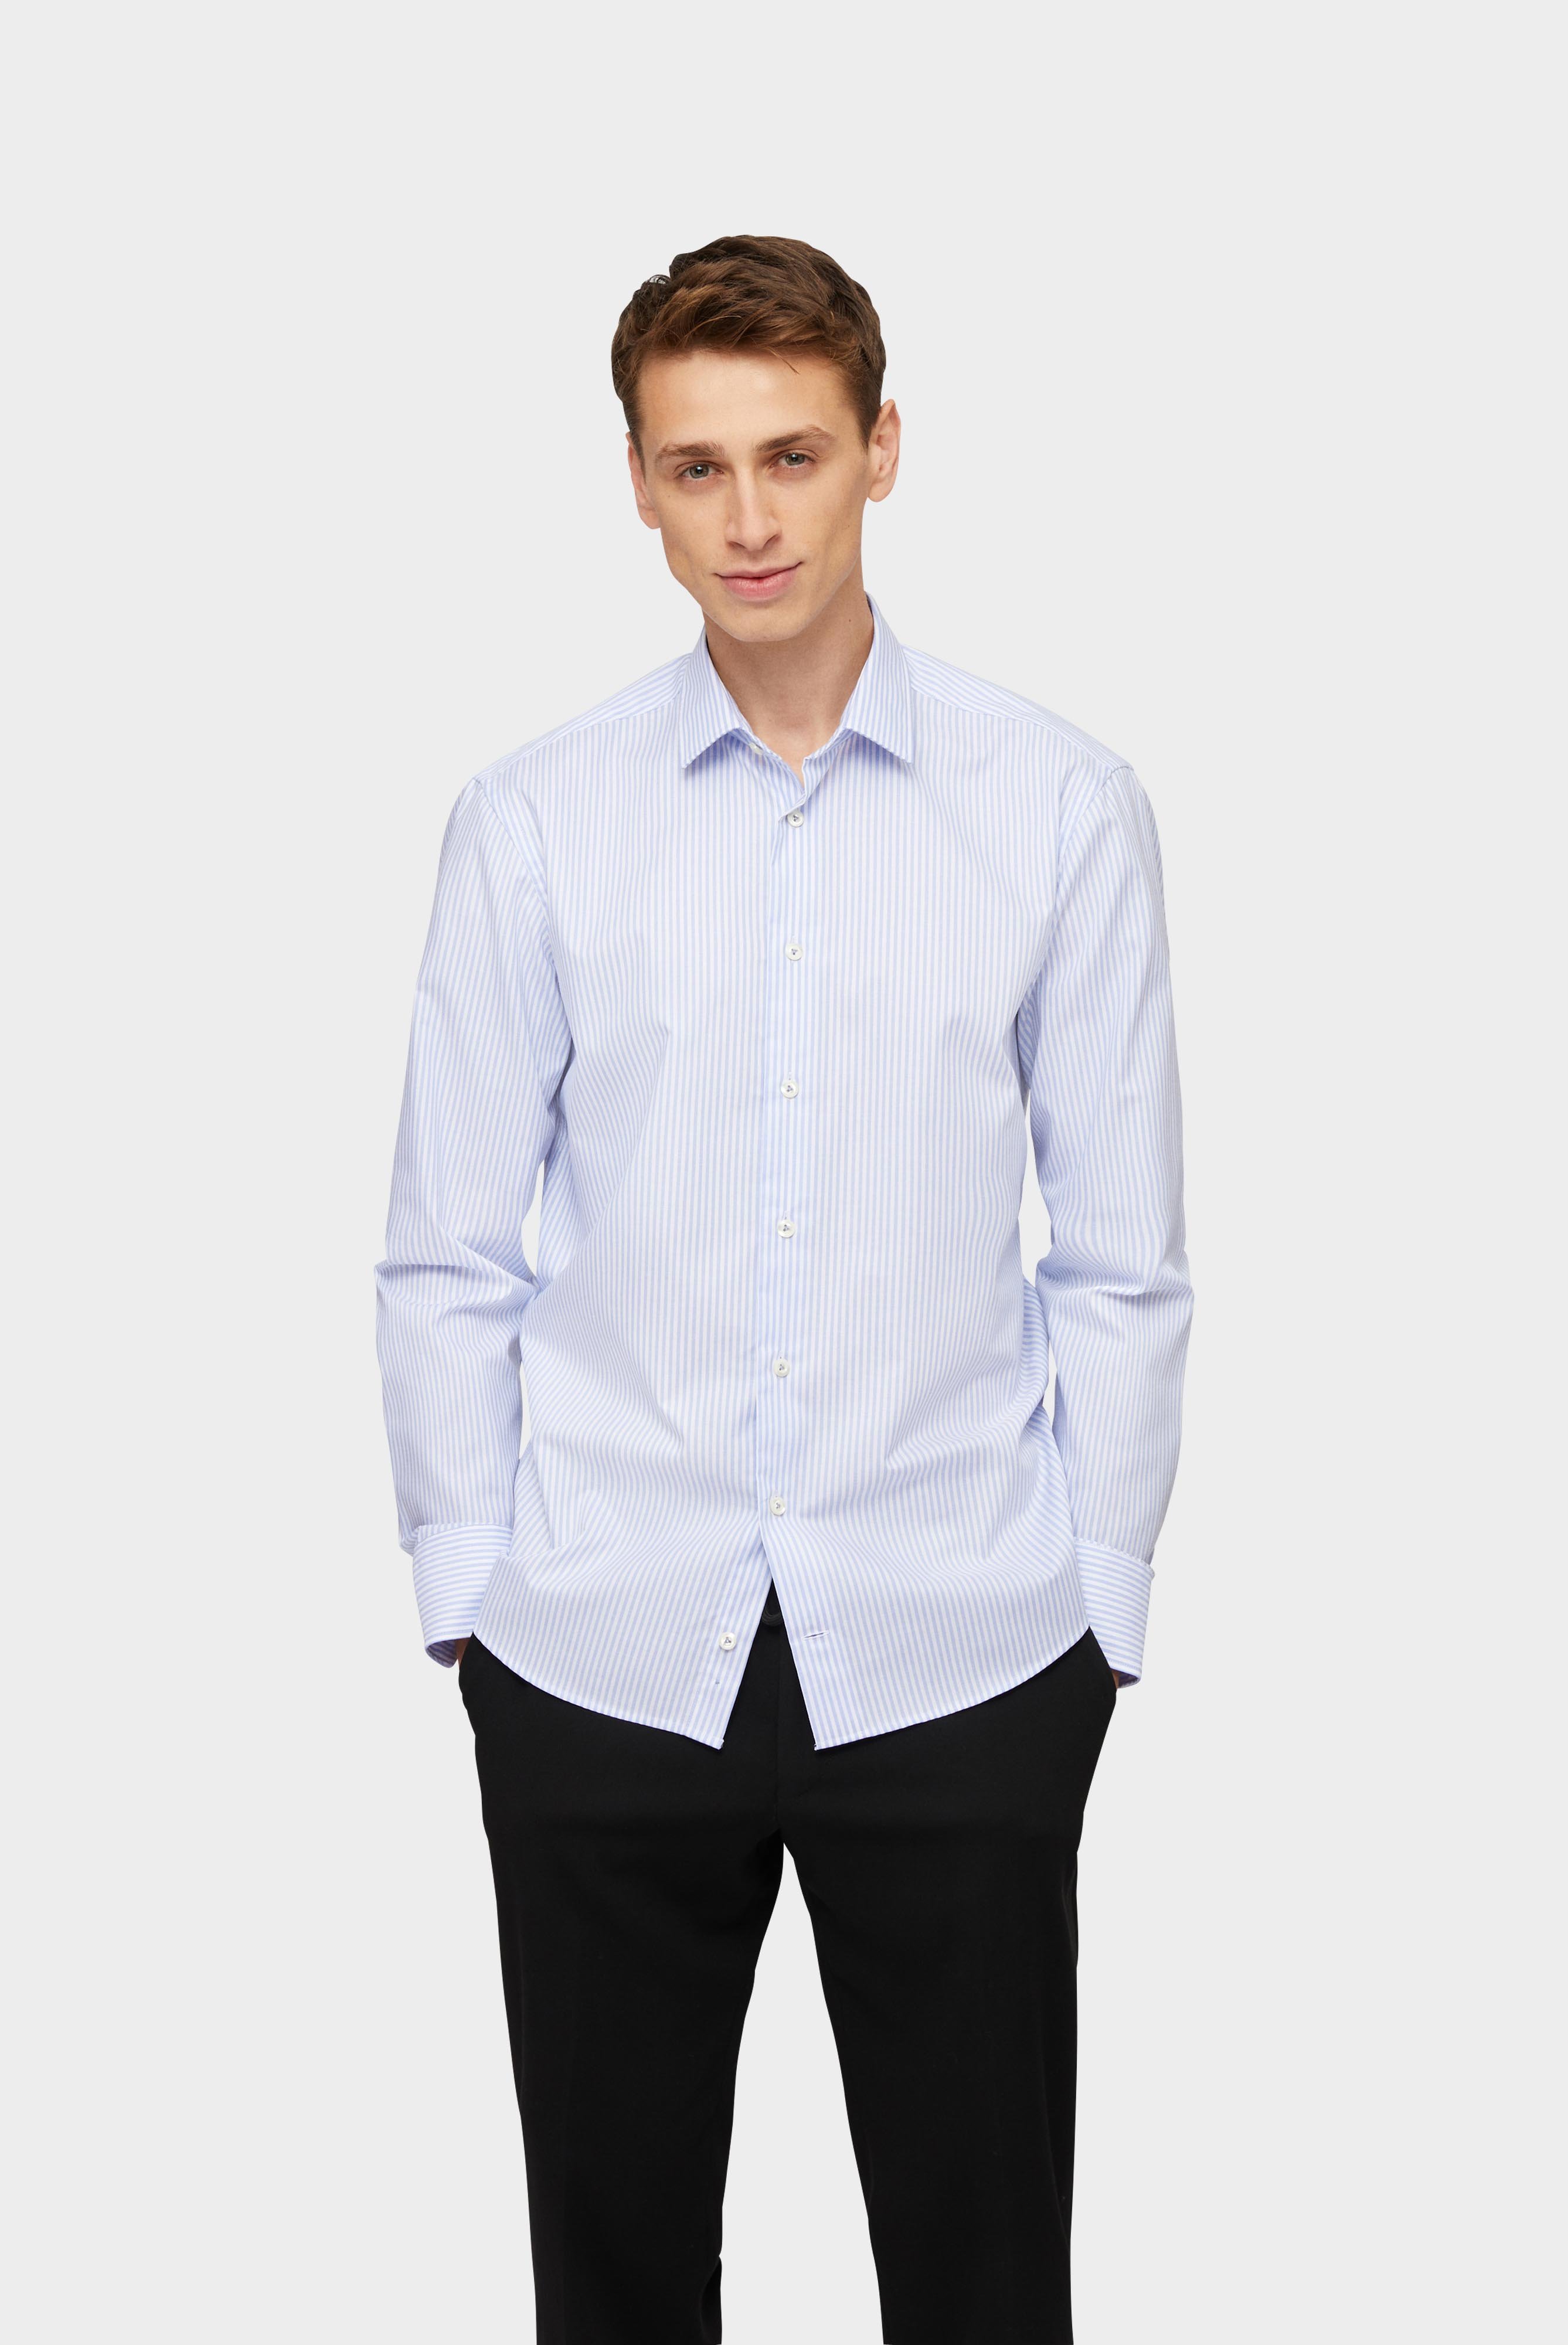 Business Shirts+Wrinkle-Free Shirt with Stripes Tailor Fit+20.3281.NV.166020.730.37